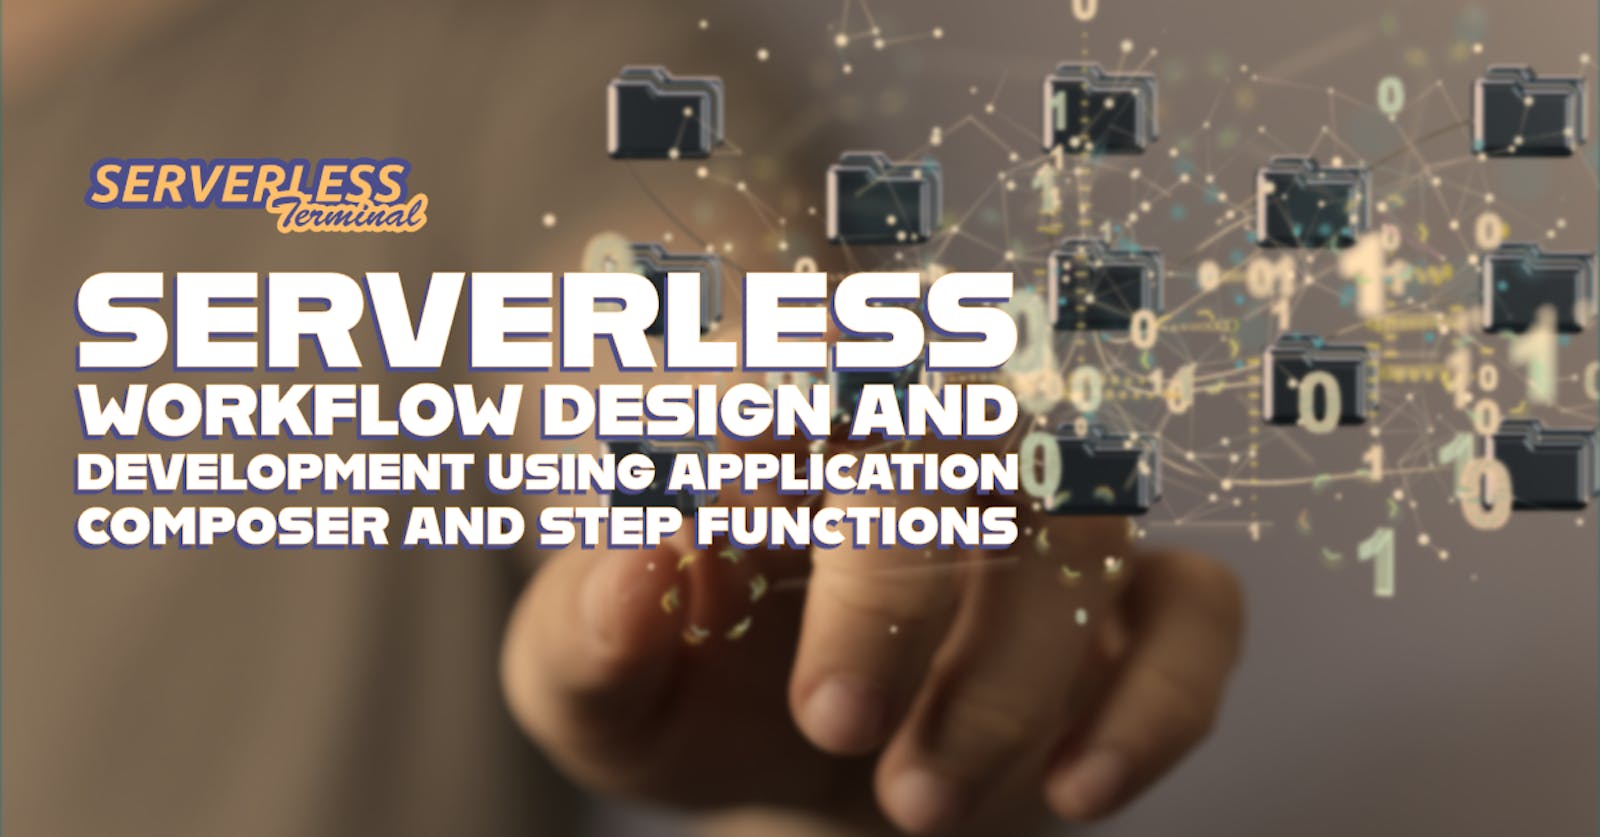 Serverless workflow design and development using Application Composer and Step Functions